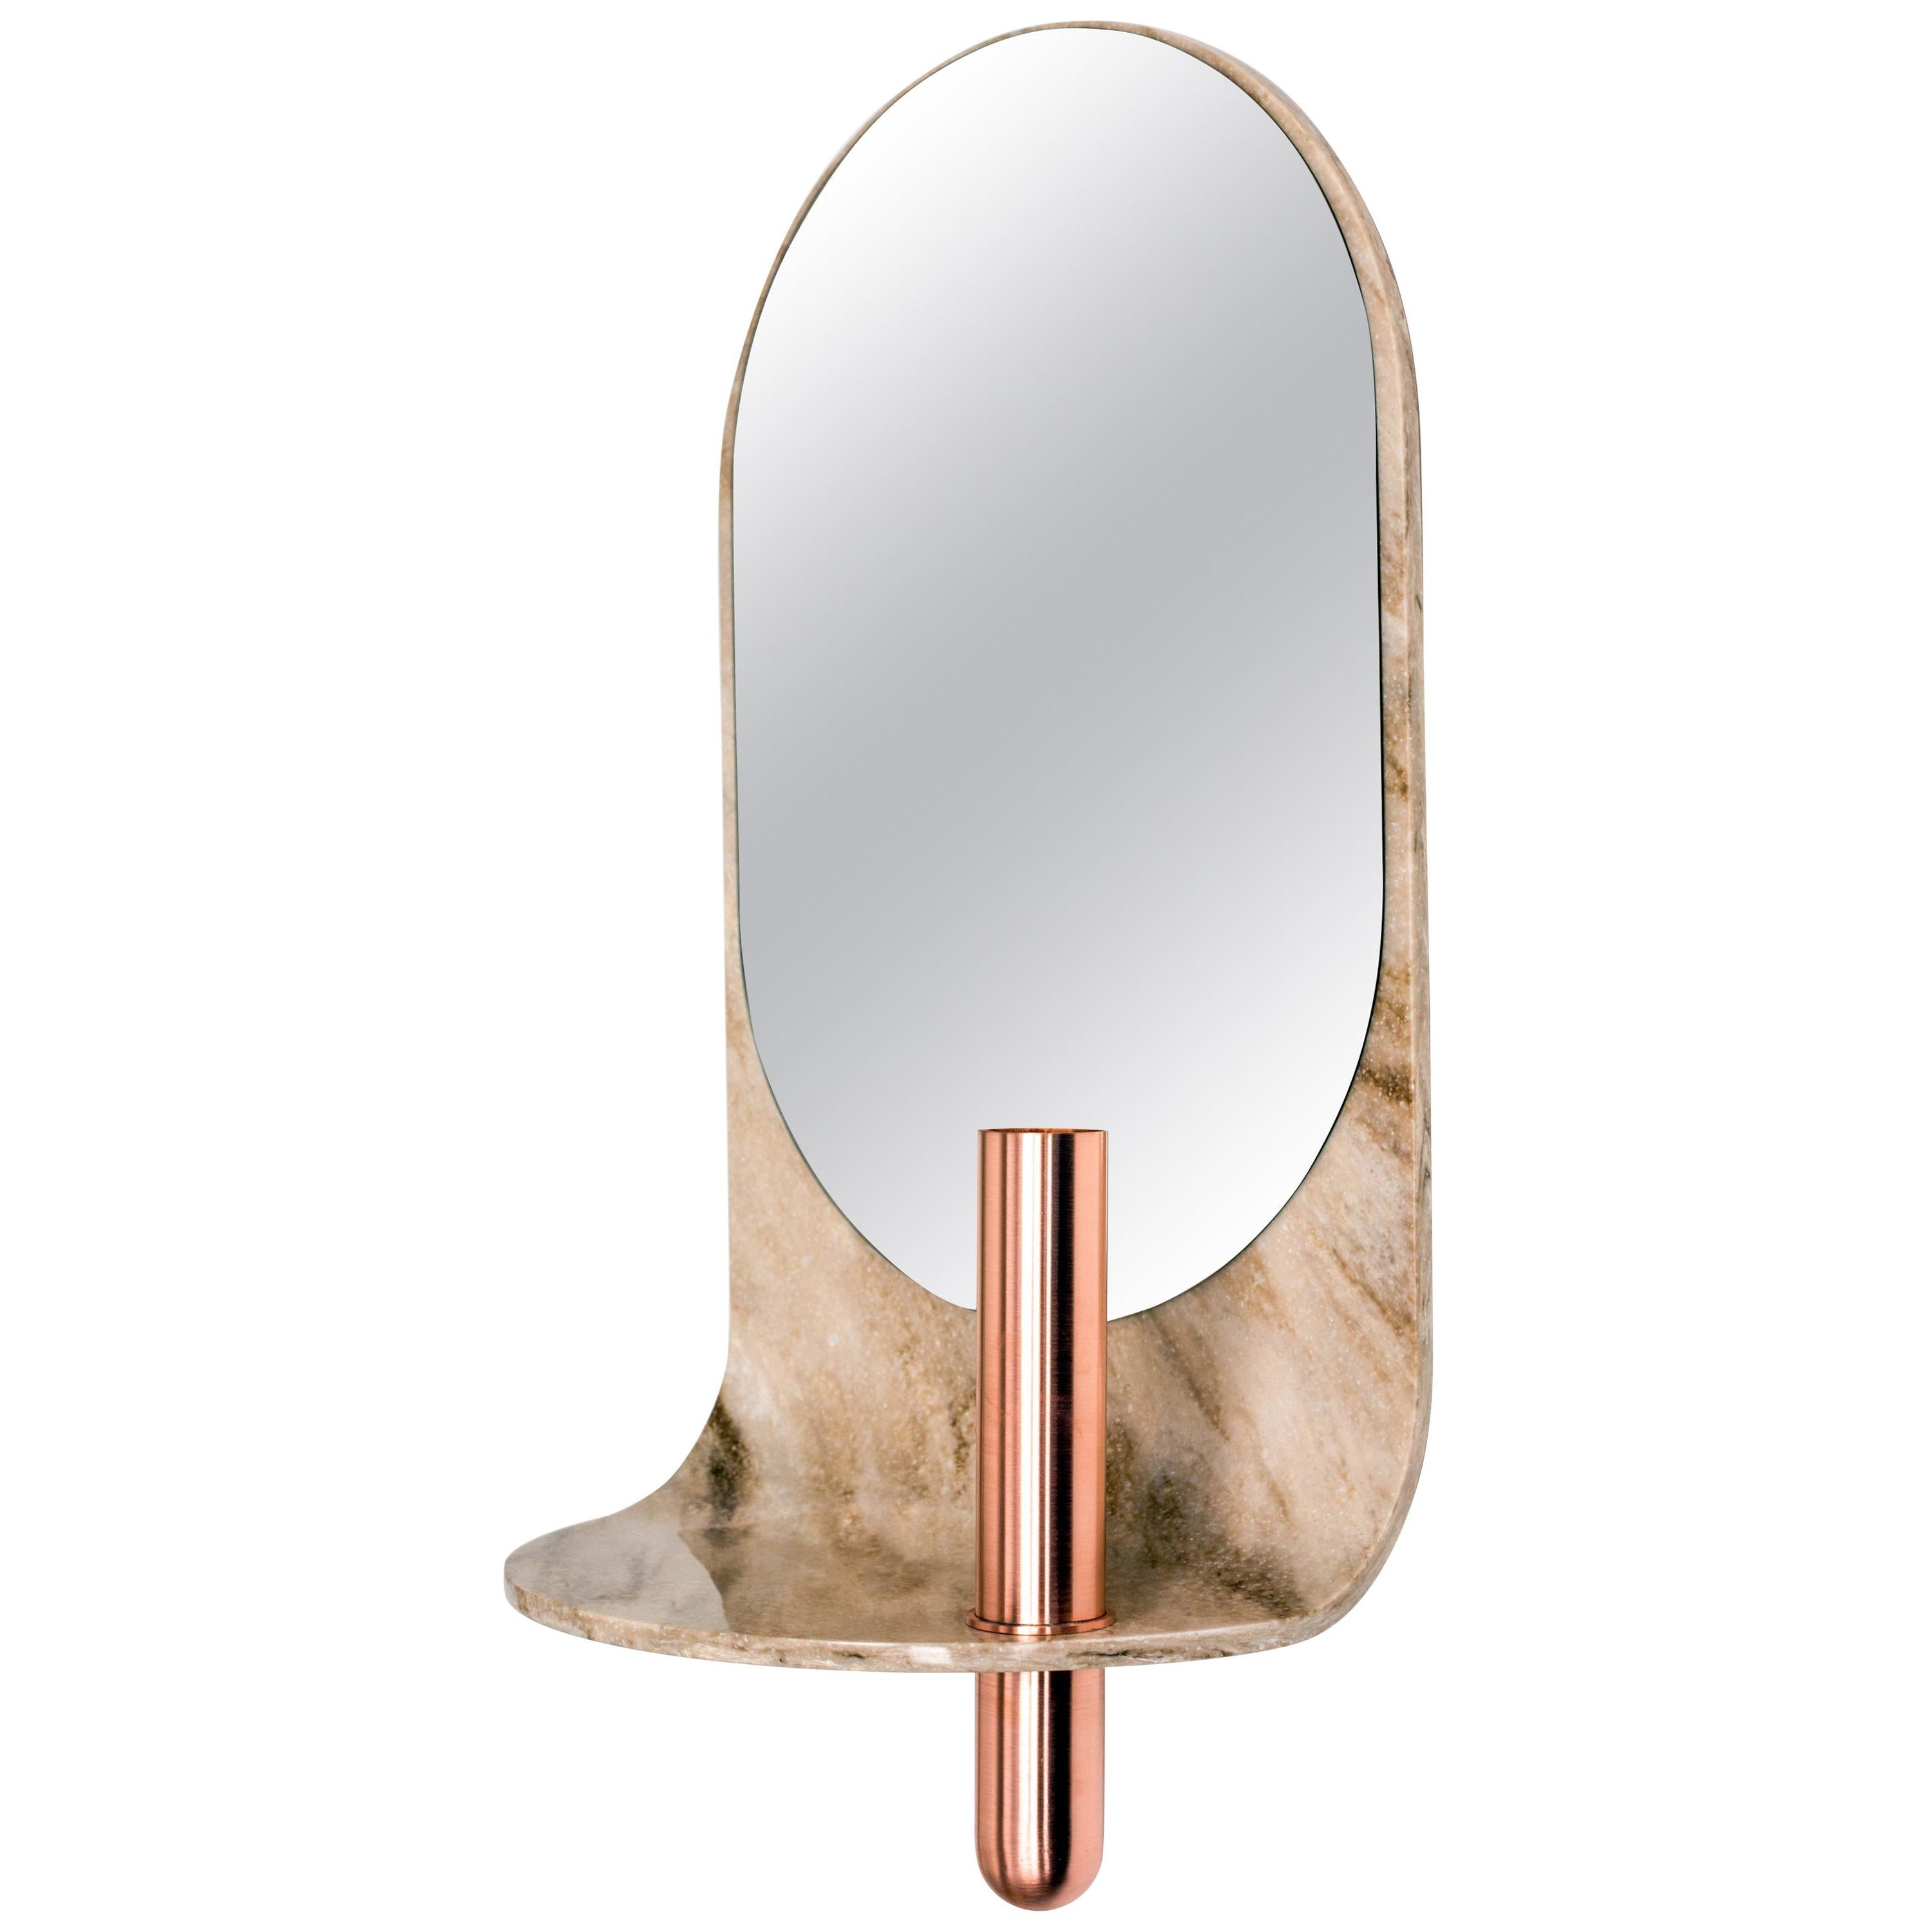 Swoop Mirror in Curved Stone with Copper Vase by Birnam Wood Studio